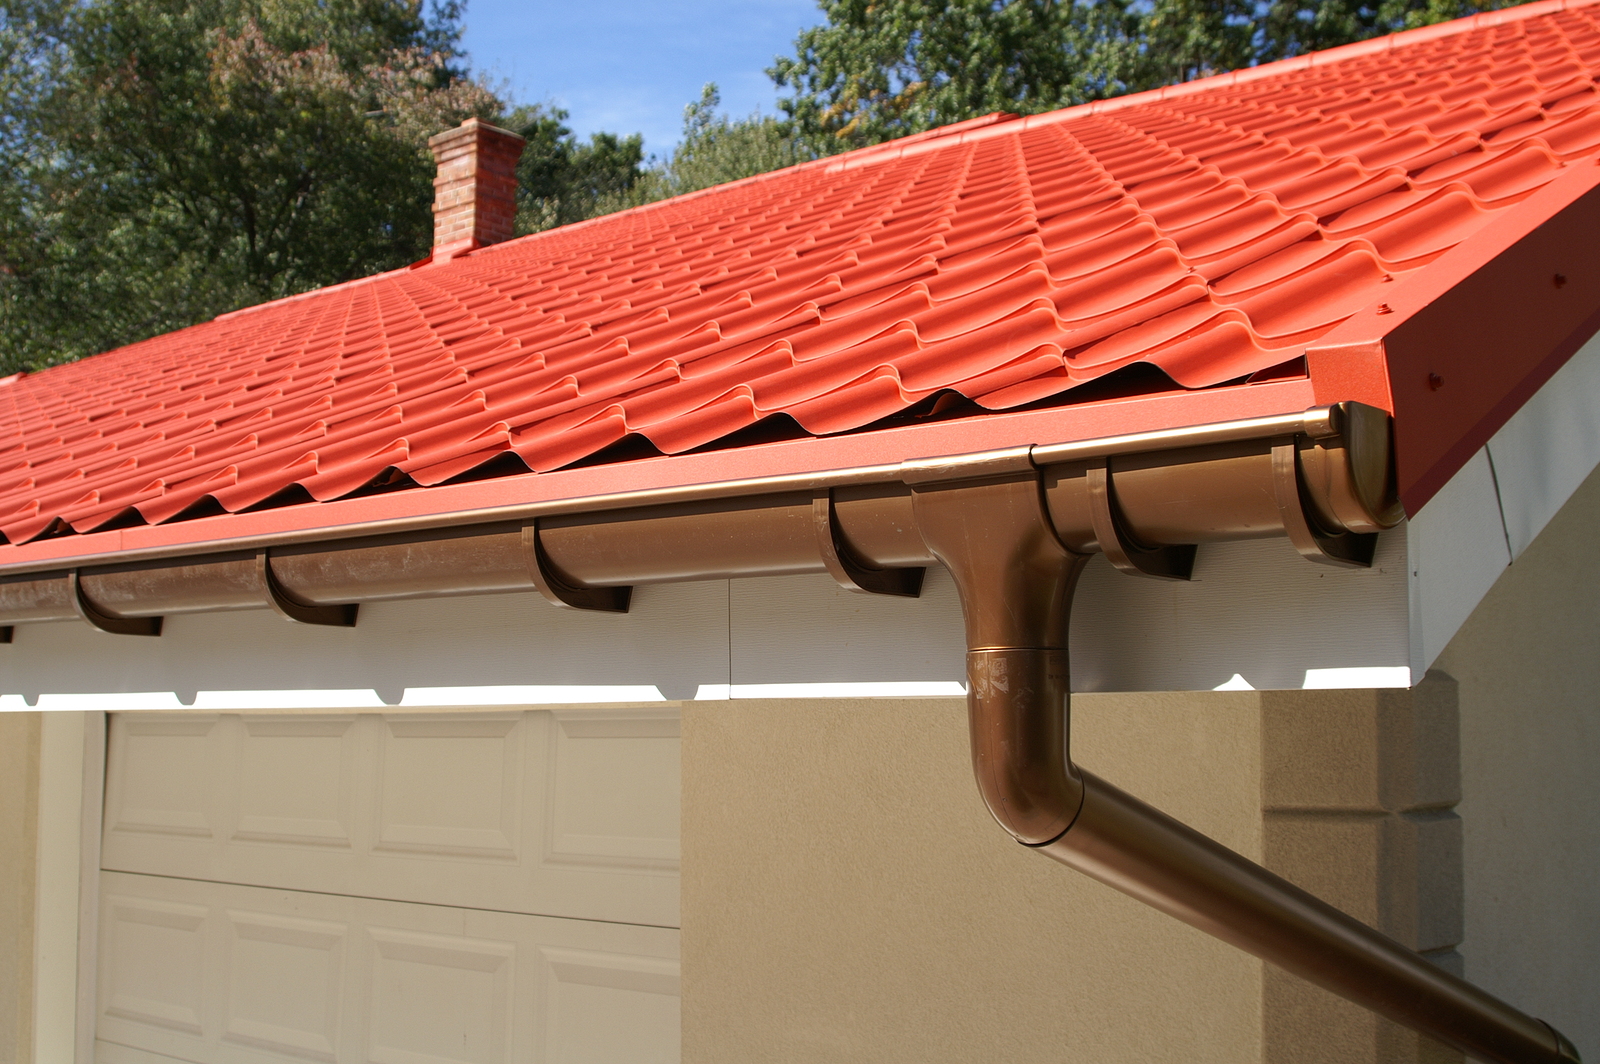 Hire a Menlo Park Roofing Contractor for Weather-Related Roof Damage